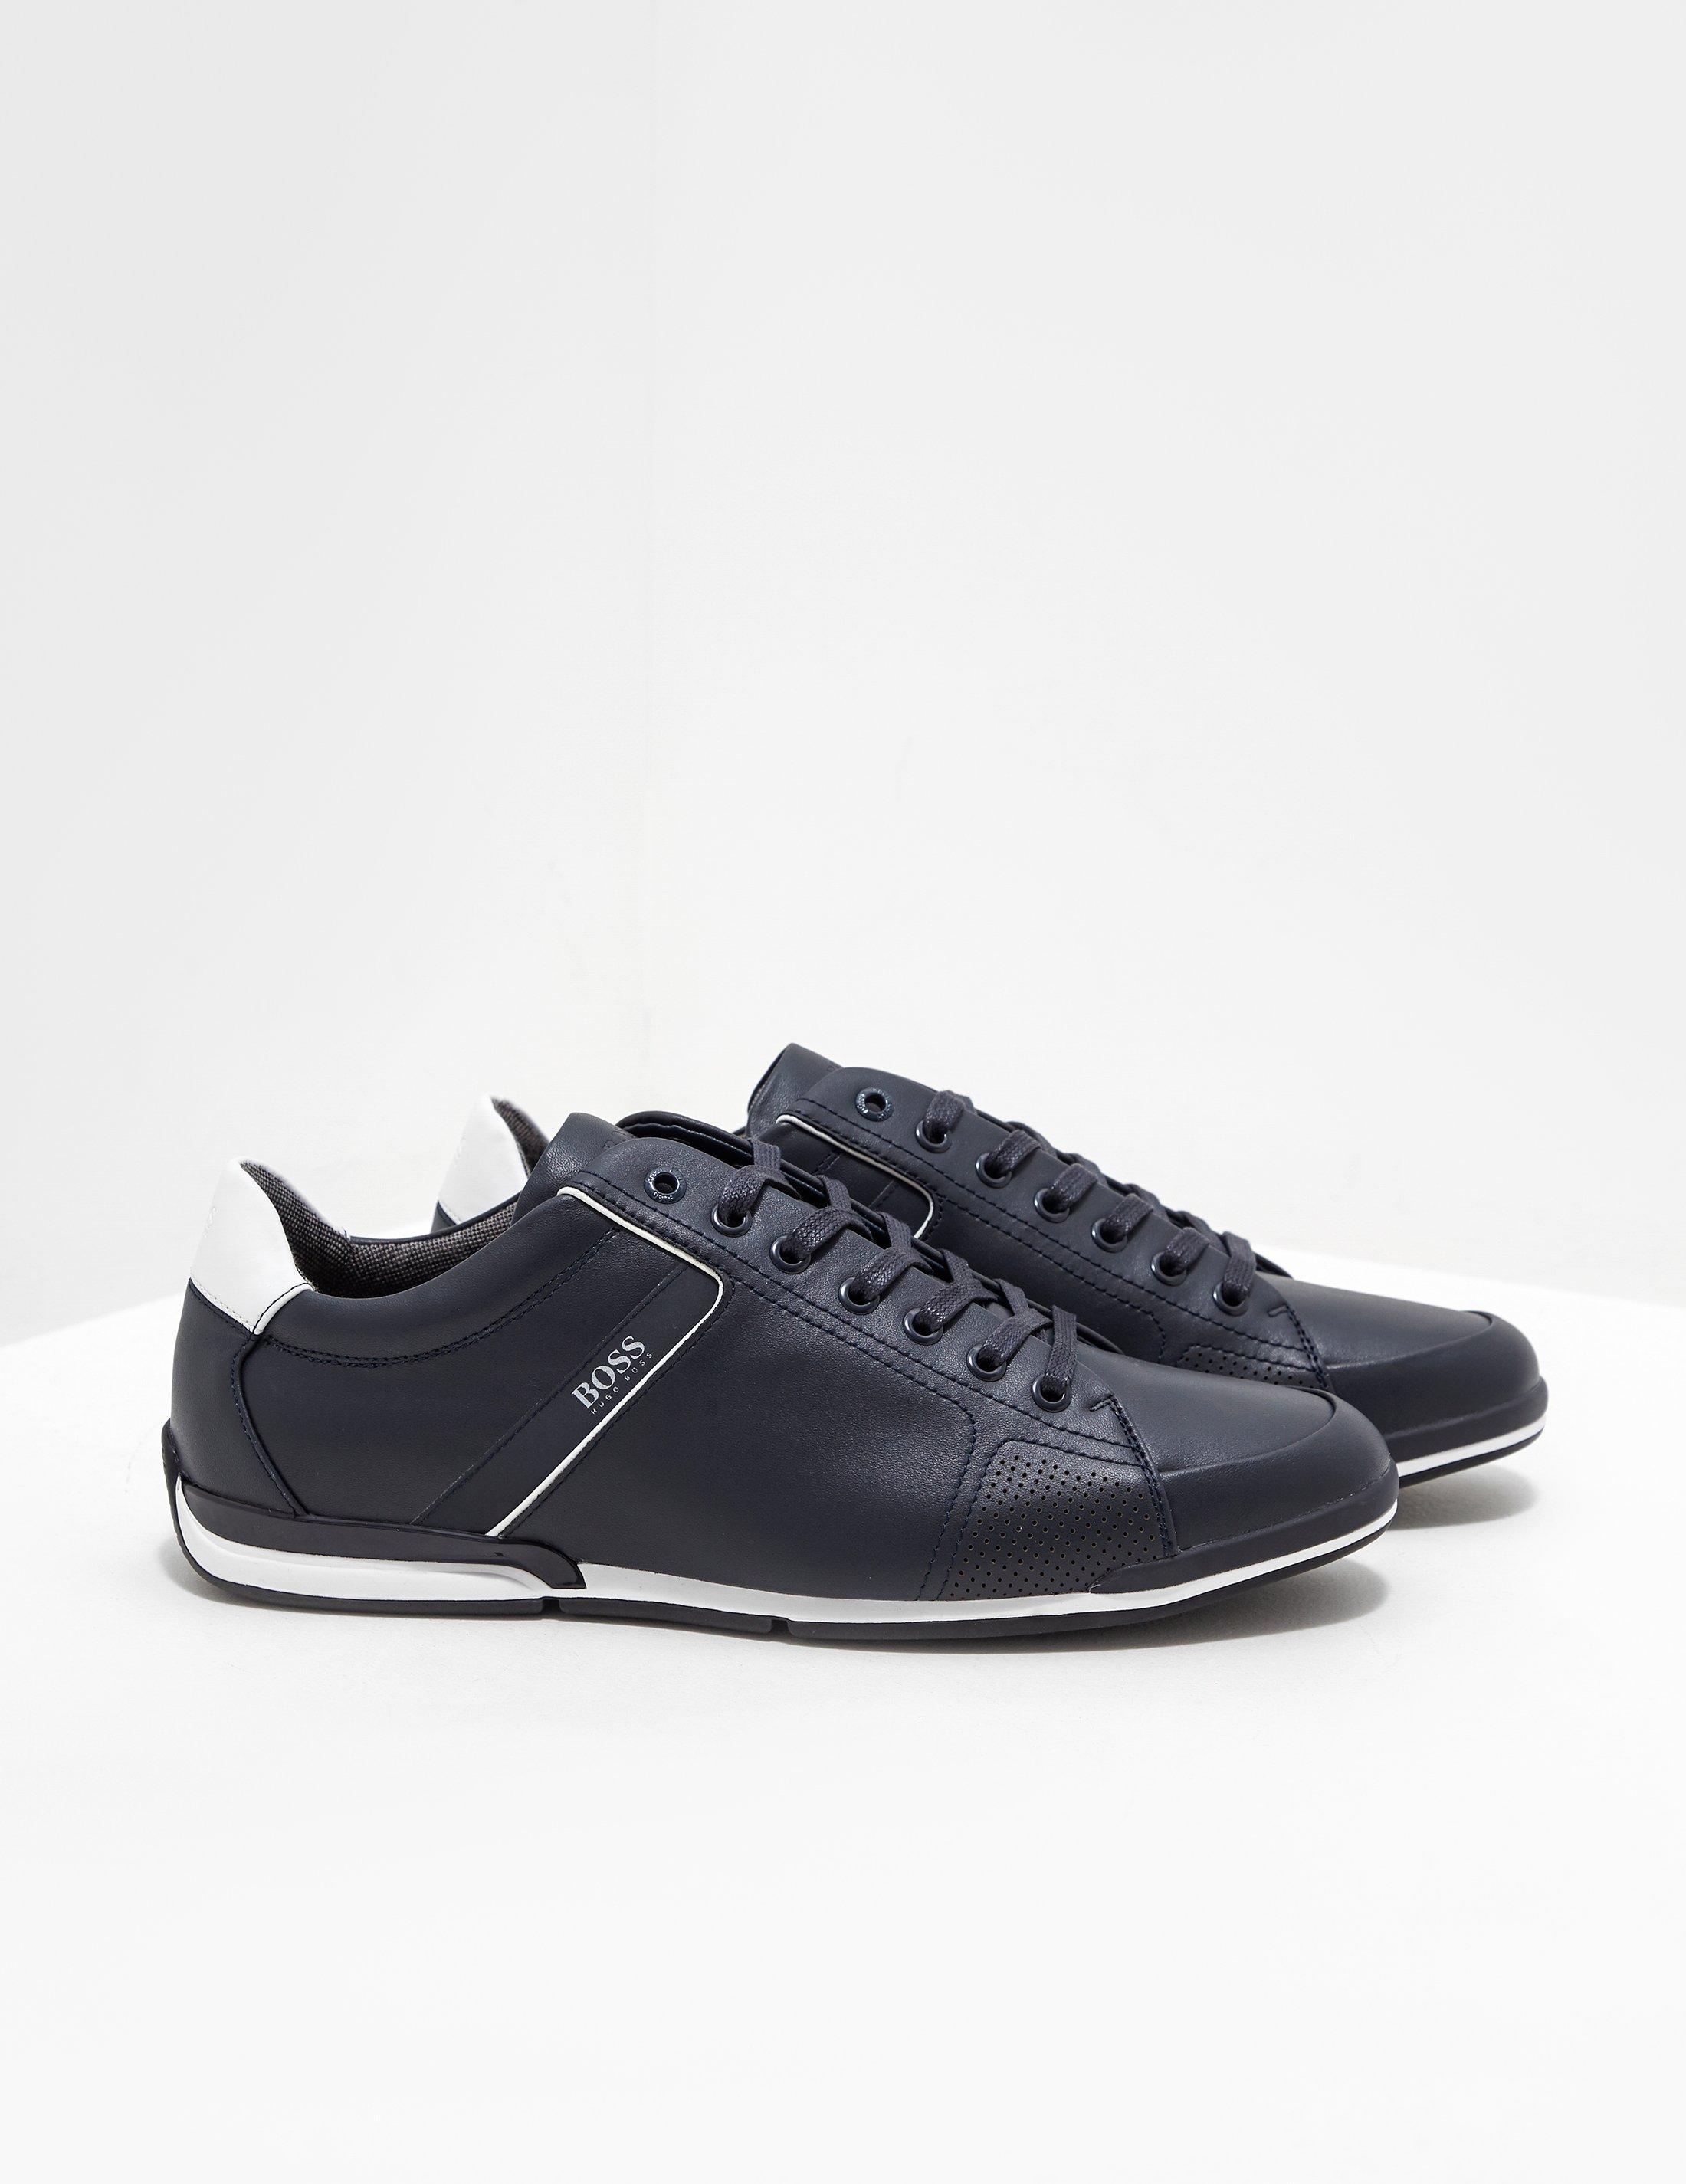 BOSS Saturn Leather Navy Blue for Men - Lyst